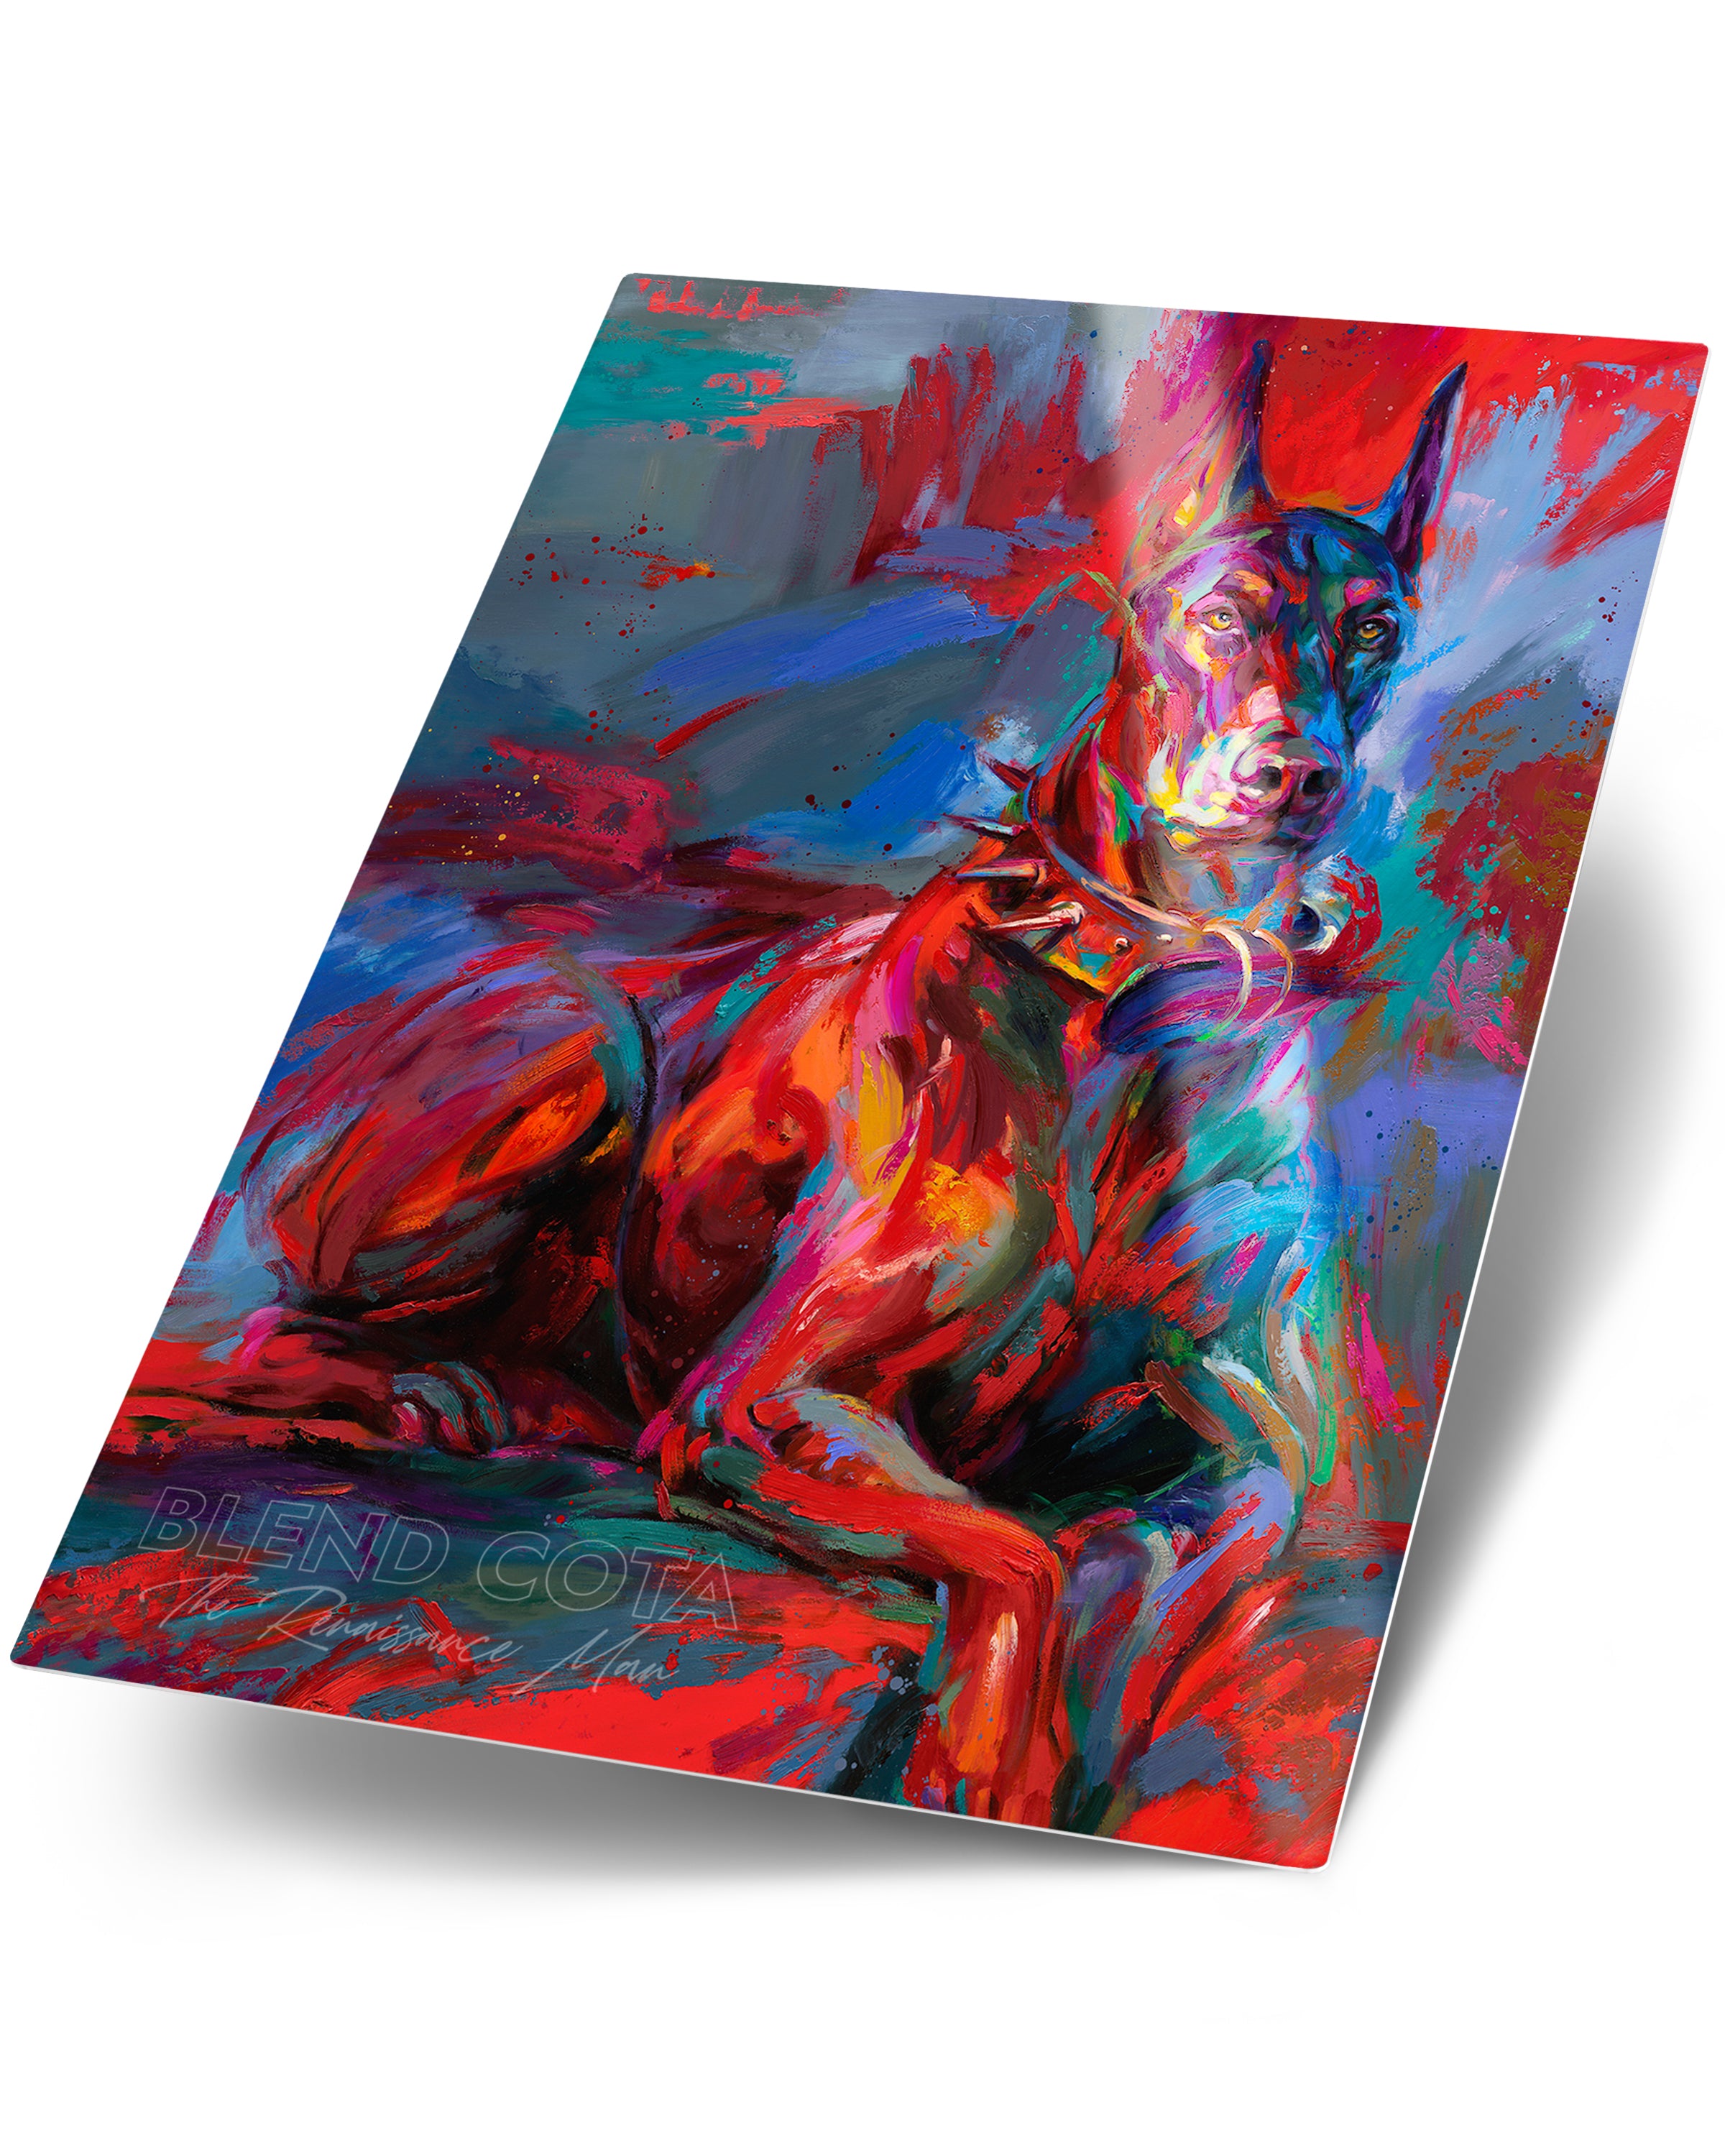 Art print on metal of the pet Doberman Apollo, a royal breed of dog, tough, brave and affectionate, guarding those he loves, in colorful brushstrokes, color expressionism style.